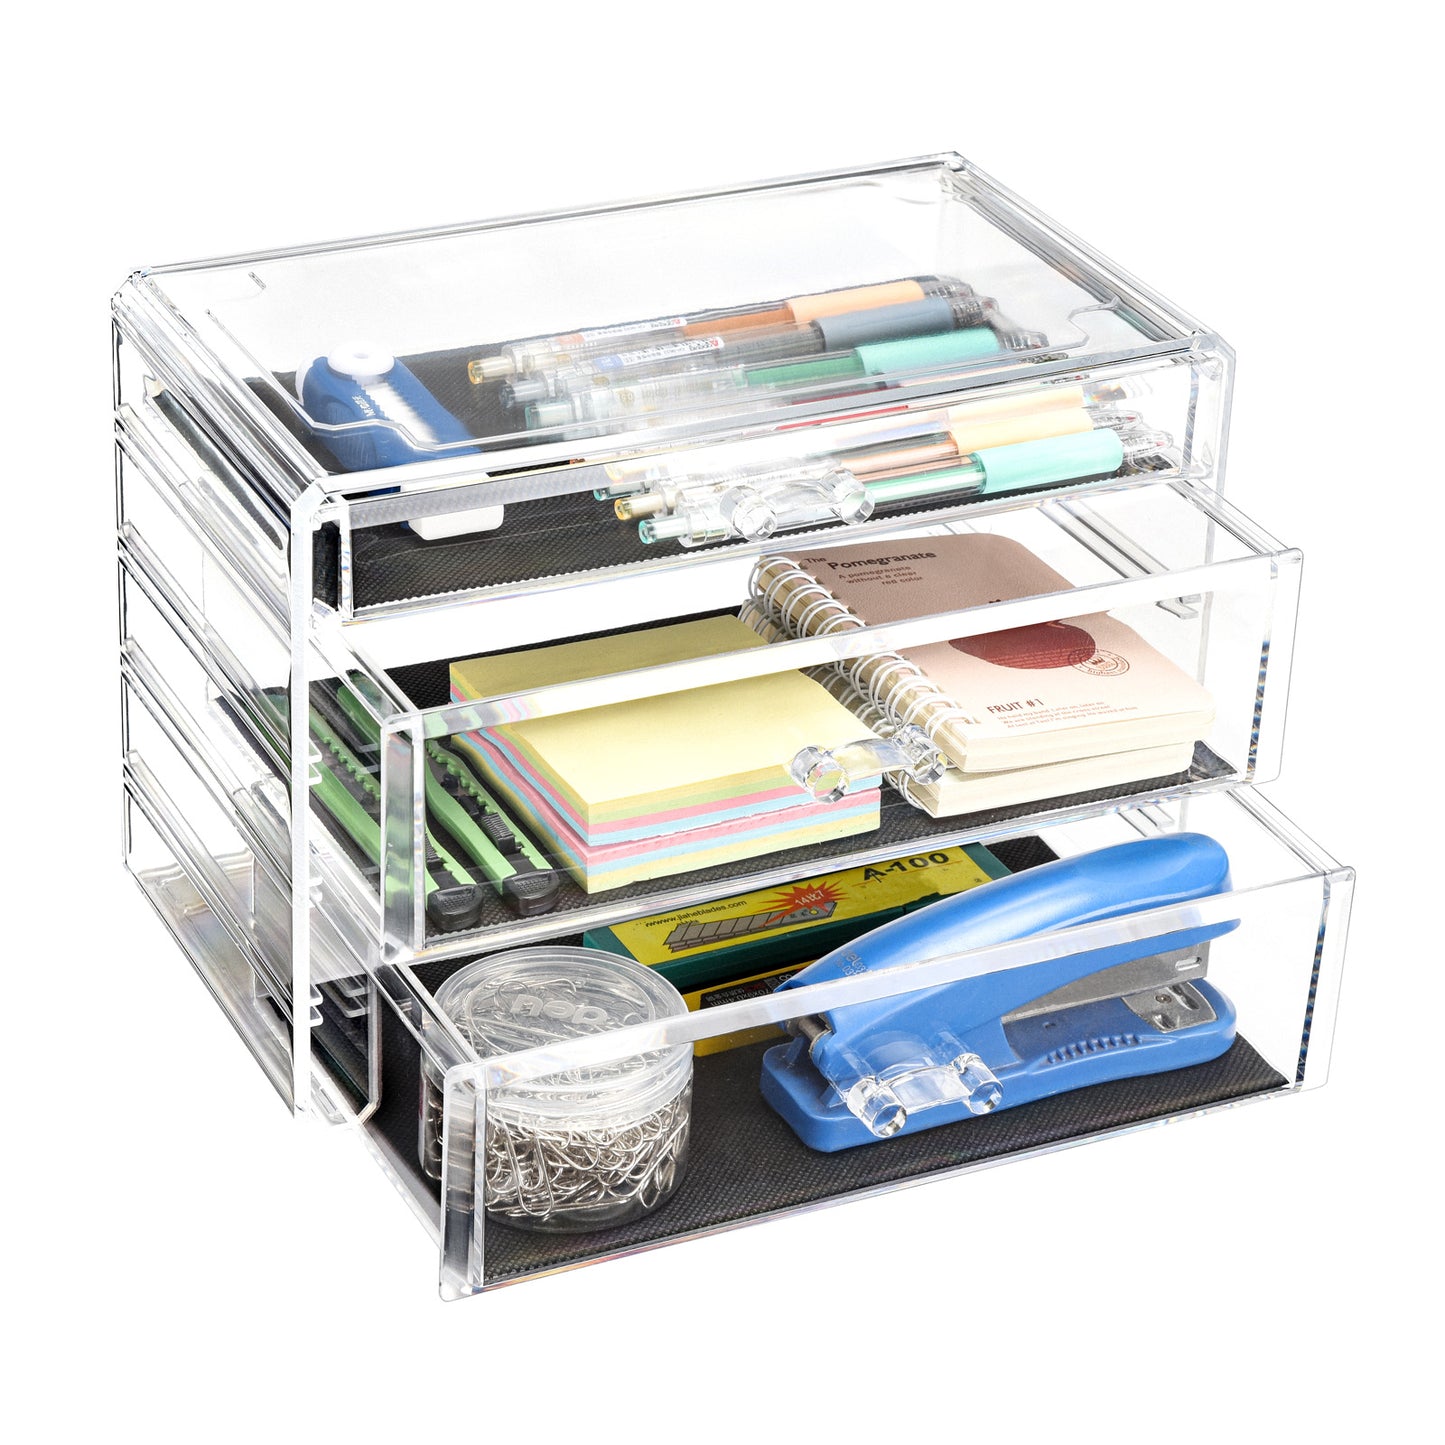 Cosmetic Acrylic Makeup Organizer - 3 Drawer Chest Tall